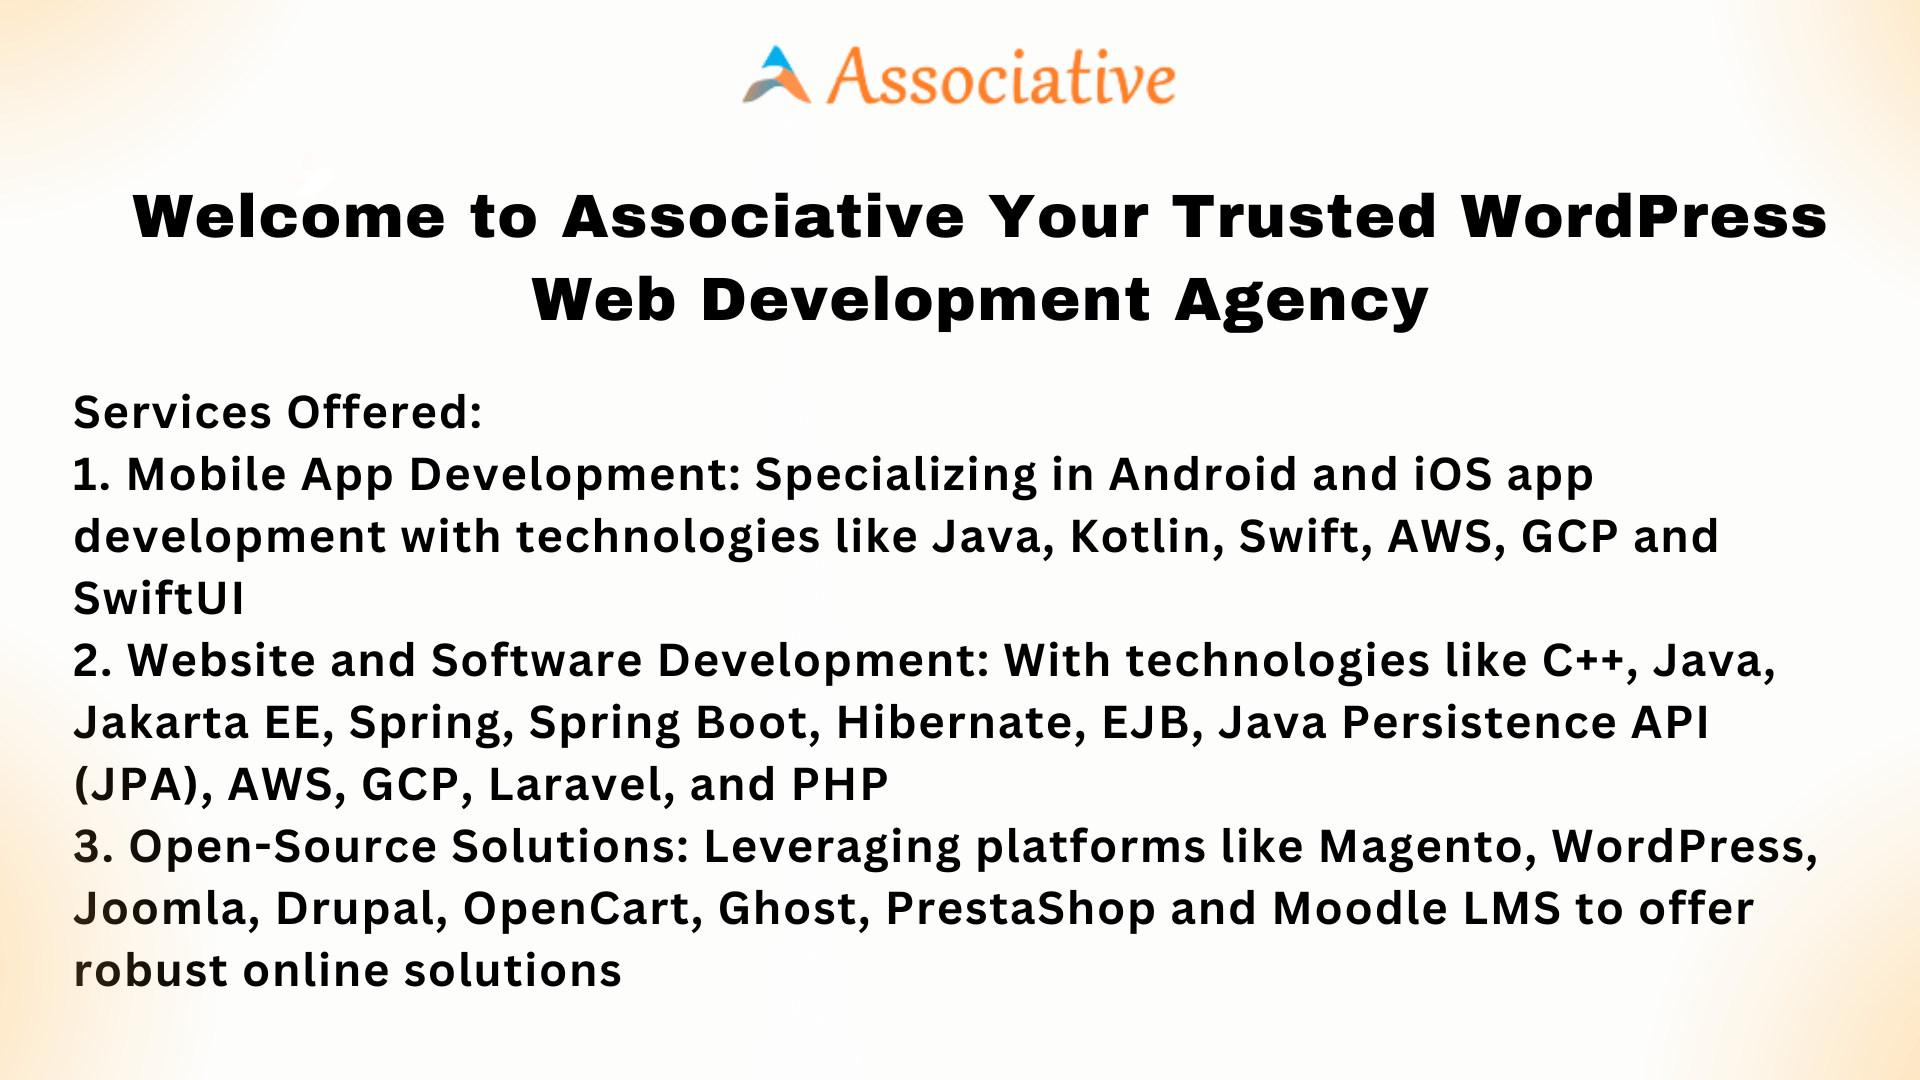 Welcome to Associative Your Trusted WordPress Web Development Agency